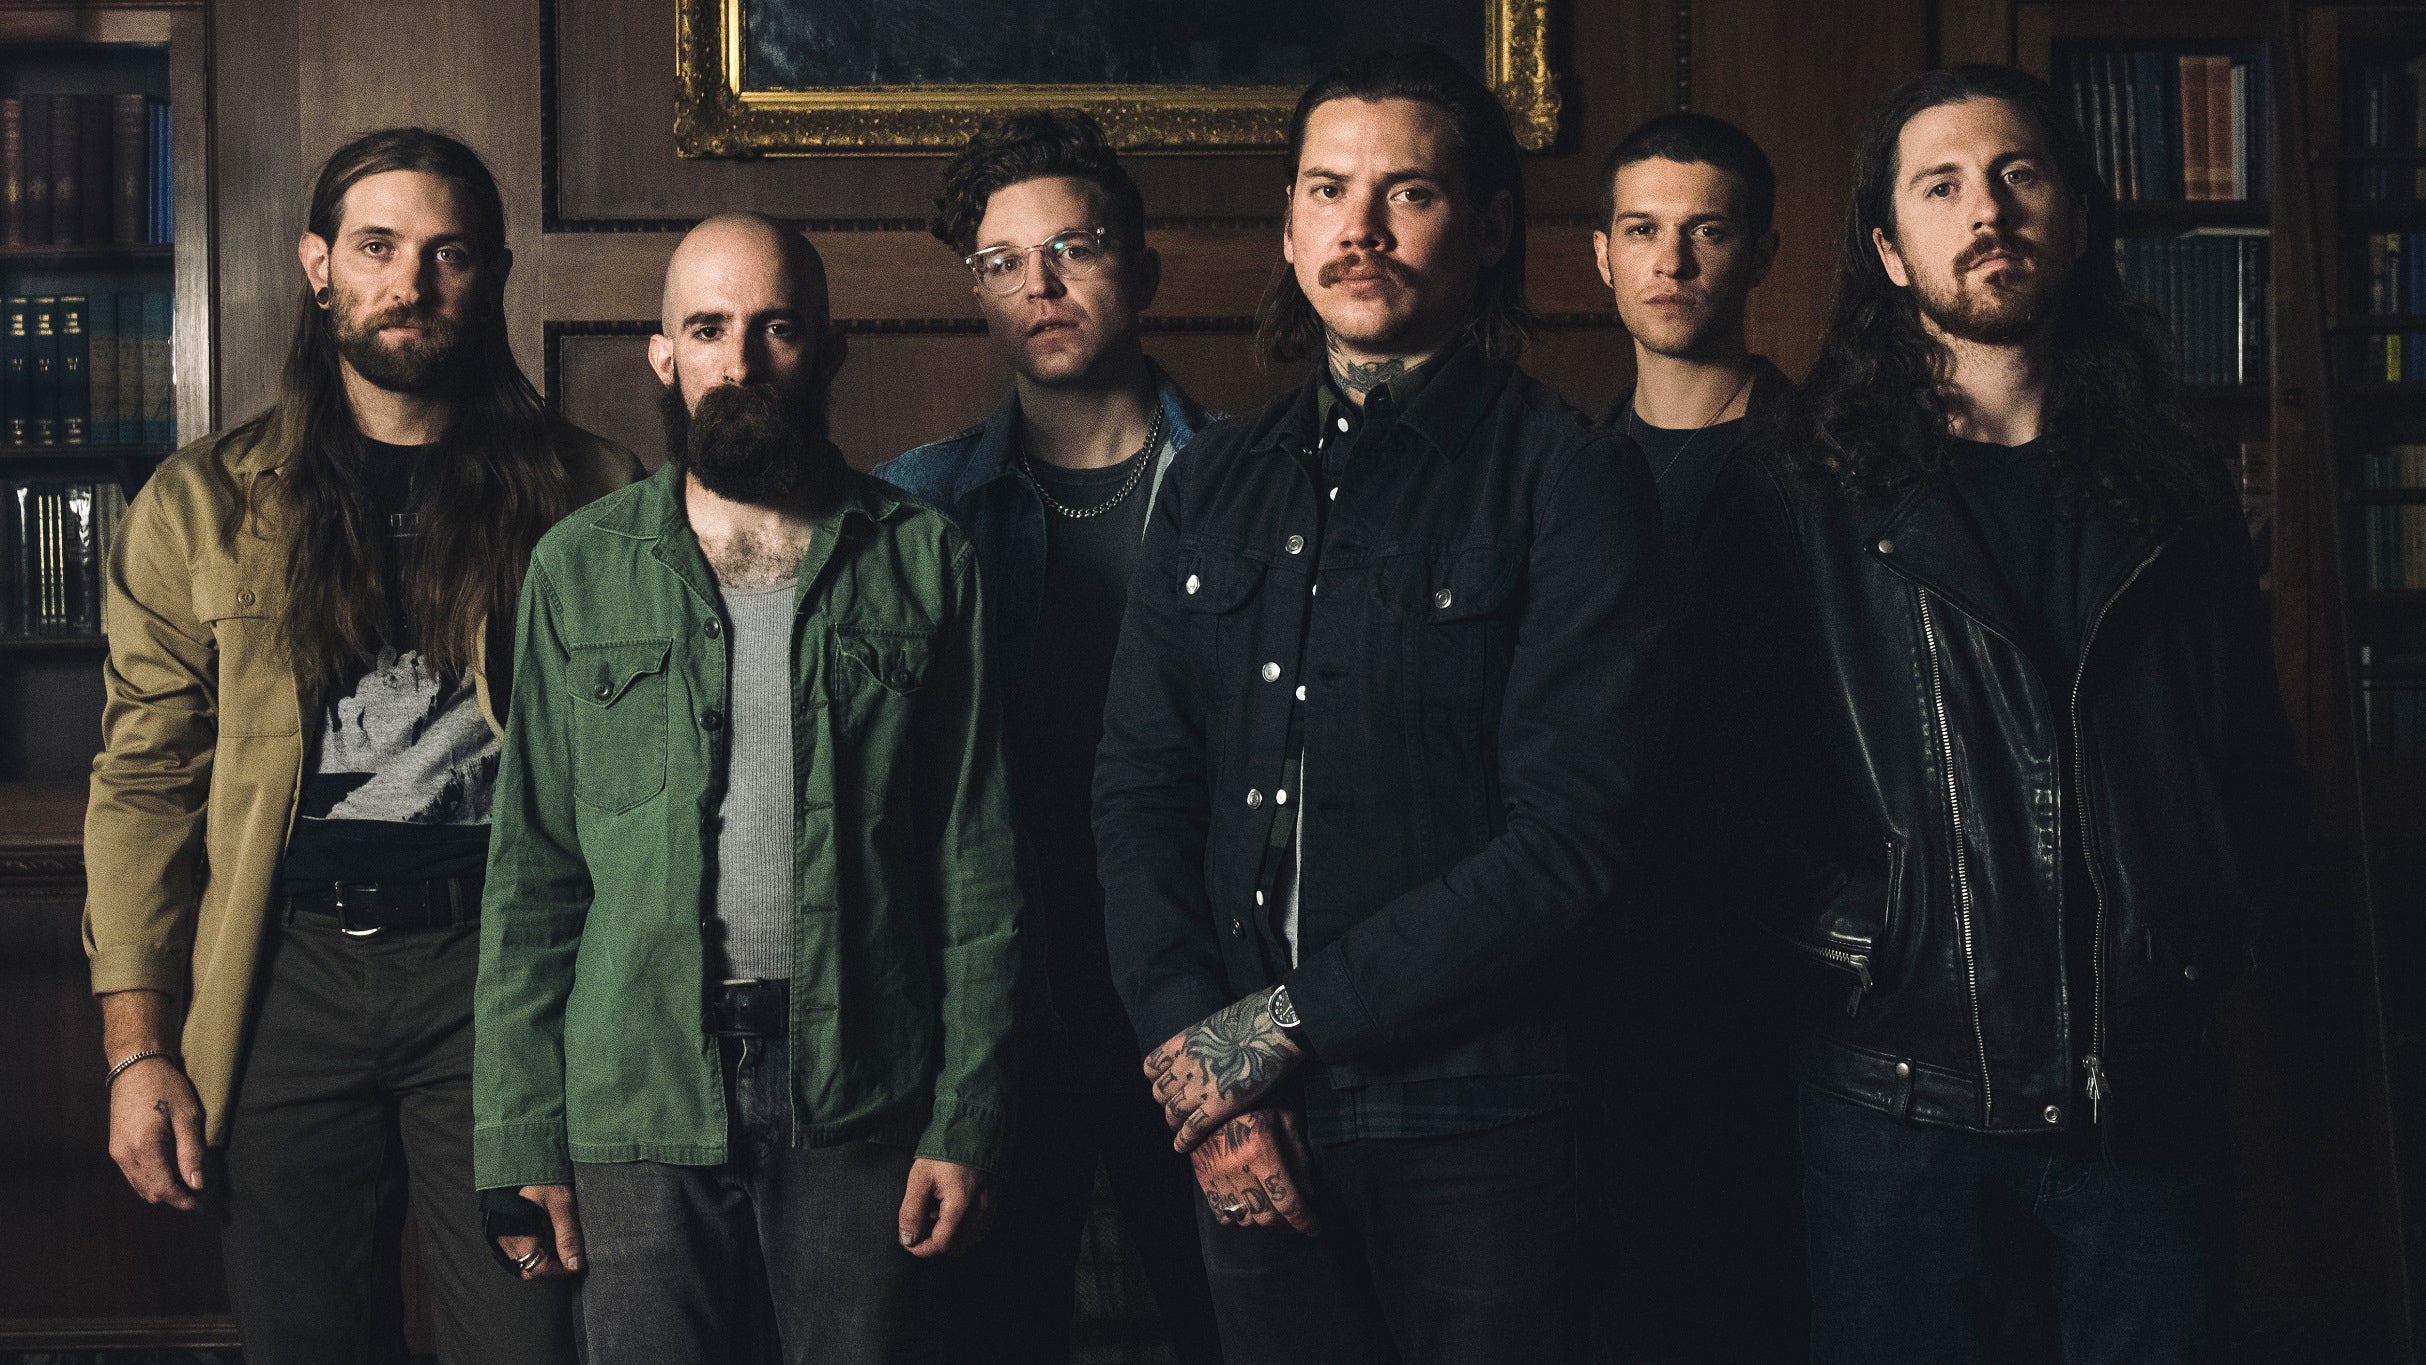 The Devil Wears Prada & Fit For A King: METALCORE DROPOUTS in Minneapolis promo photo for Official Platinum presale offer code